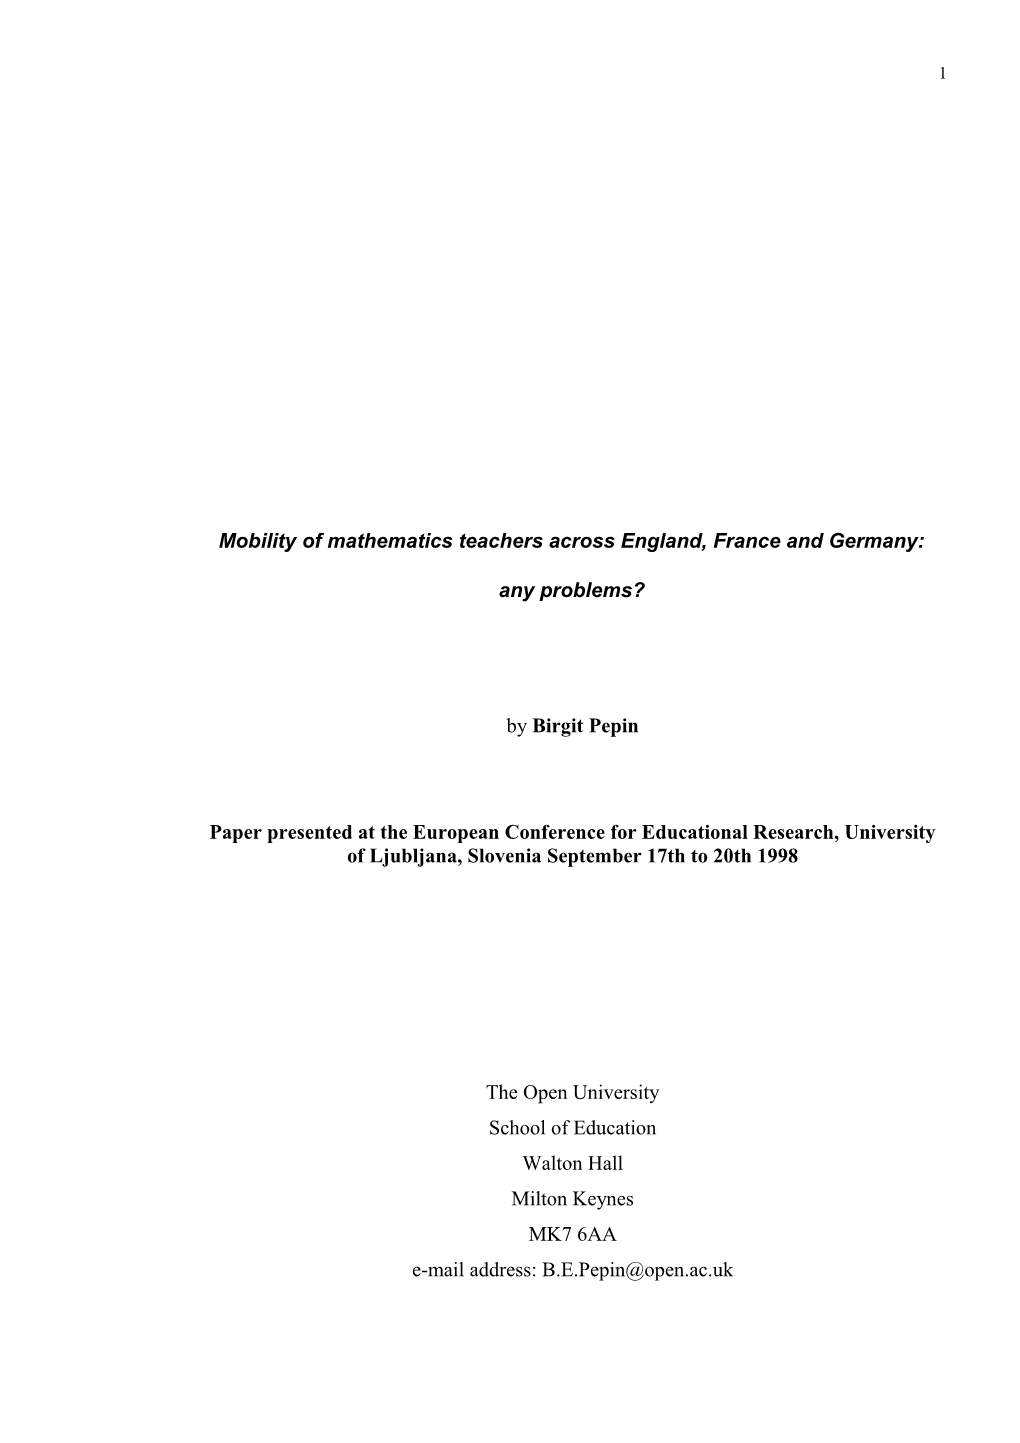 Mobility of Mathematics Teachers Across England, France and Germany